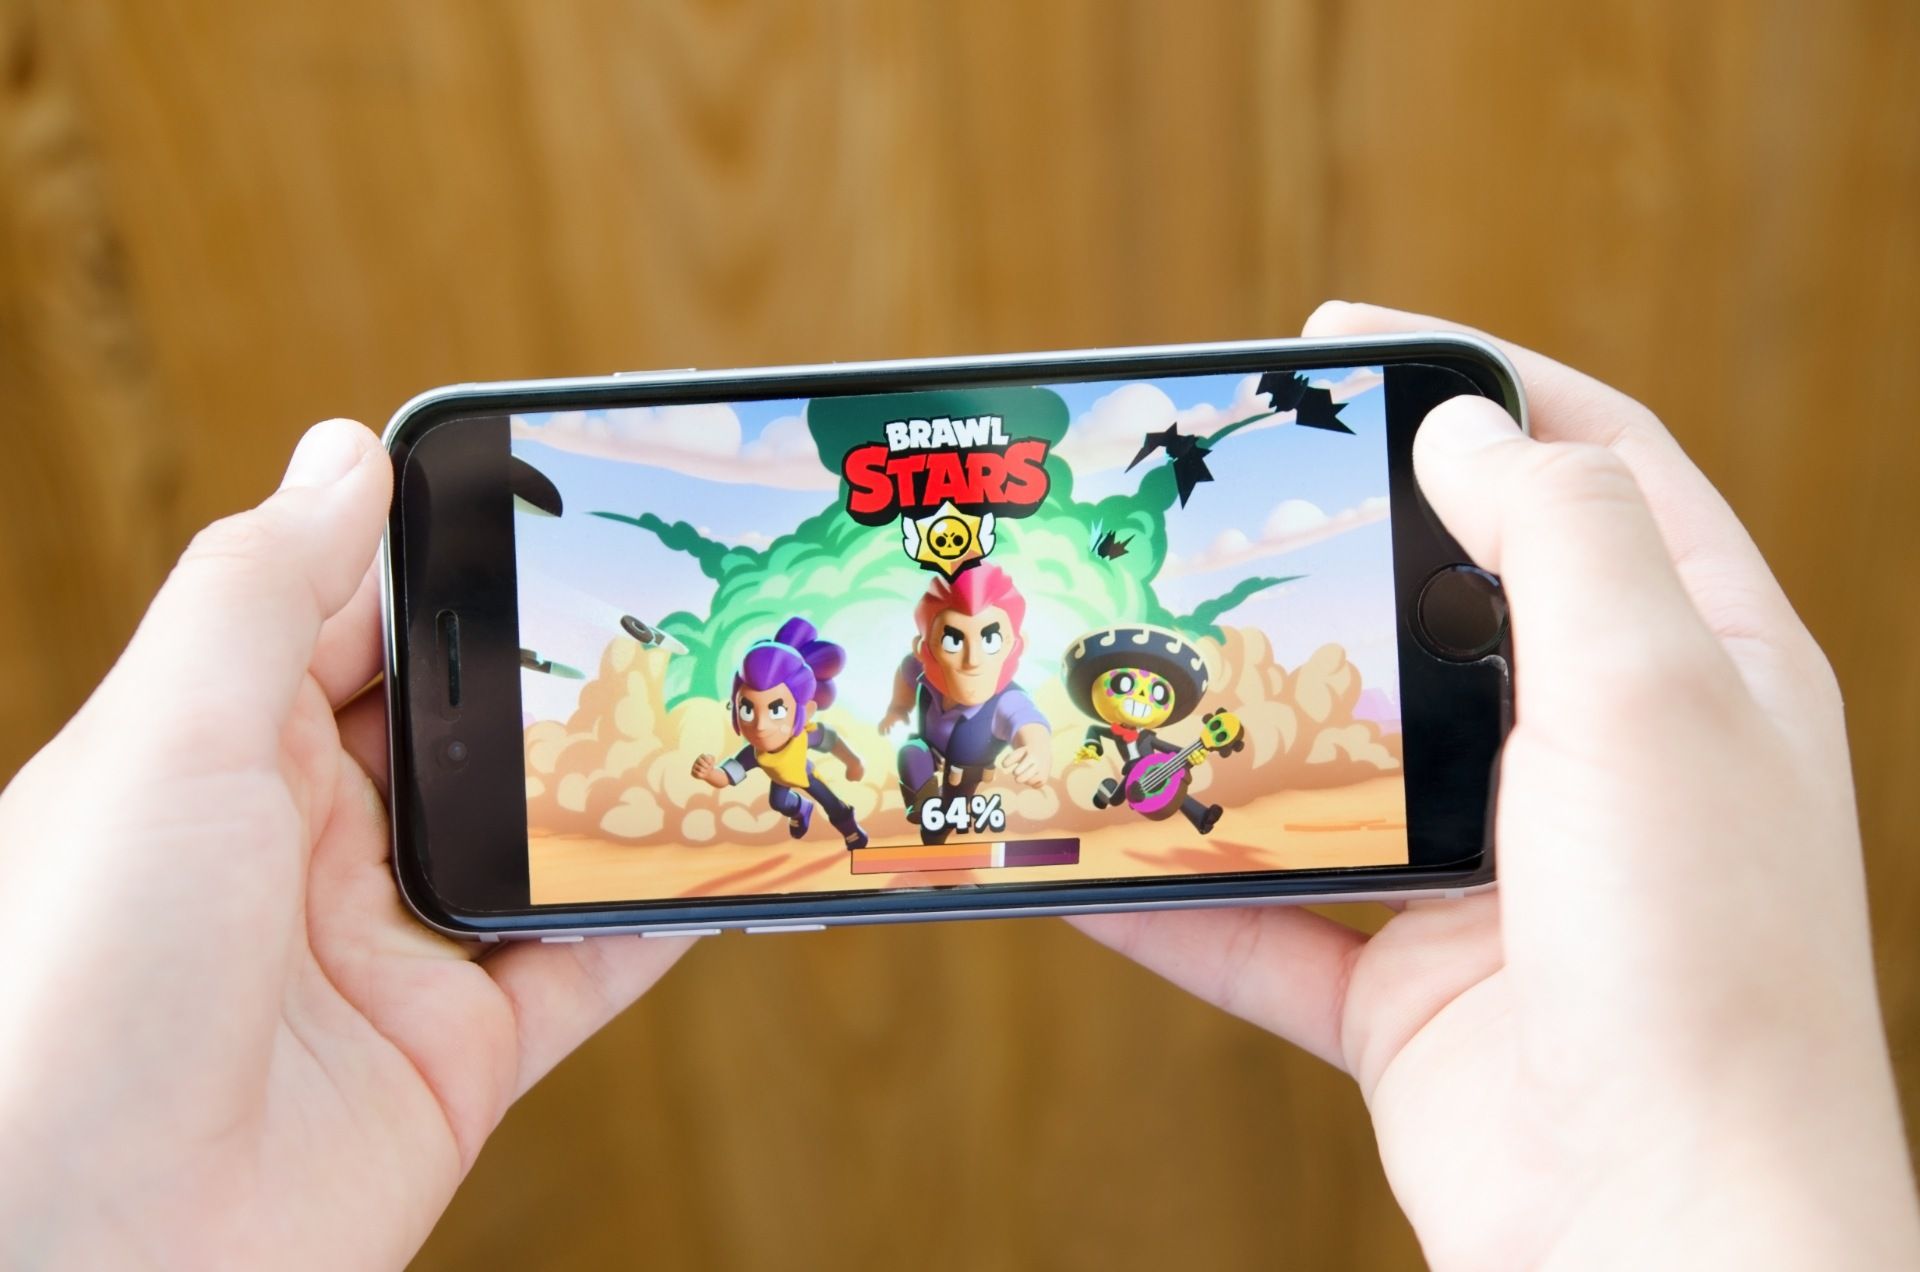 Child holding an iphone displaying the load screen for the game Brawl Stars